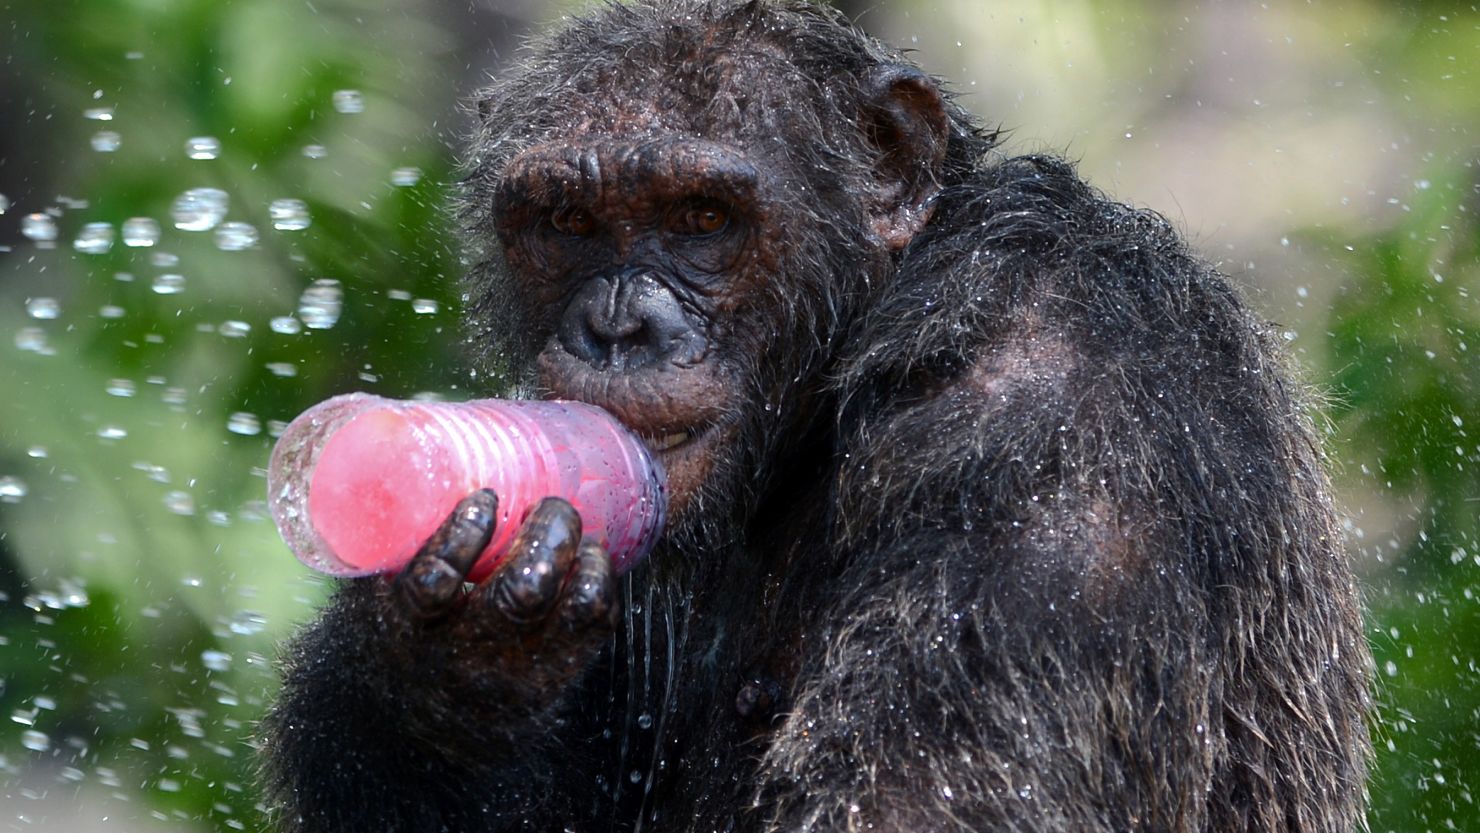 A chimpanzee licks a piece of ice during hot weather at Dusit Zoo in Bangkok on April 2, 2013.